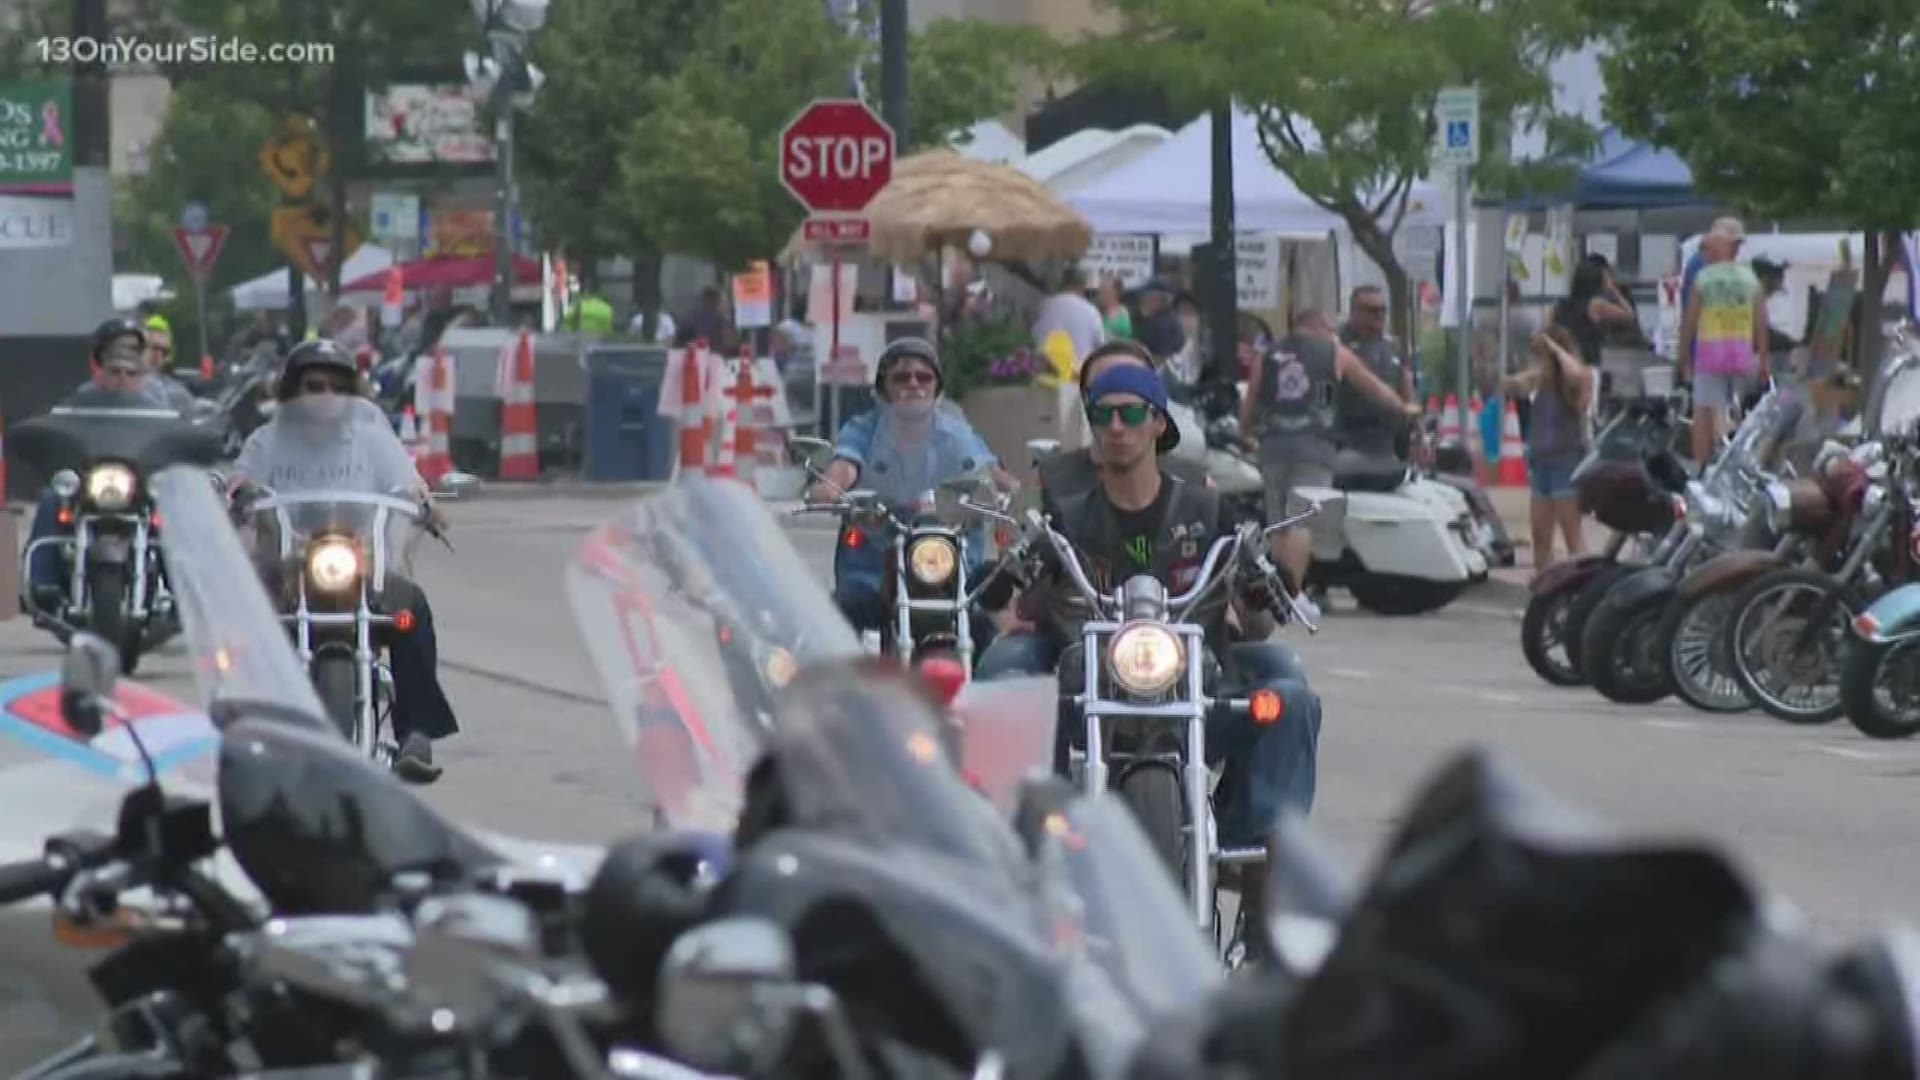 Bikers in Muskegon dealing with the heat